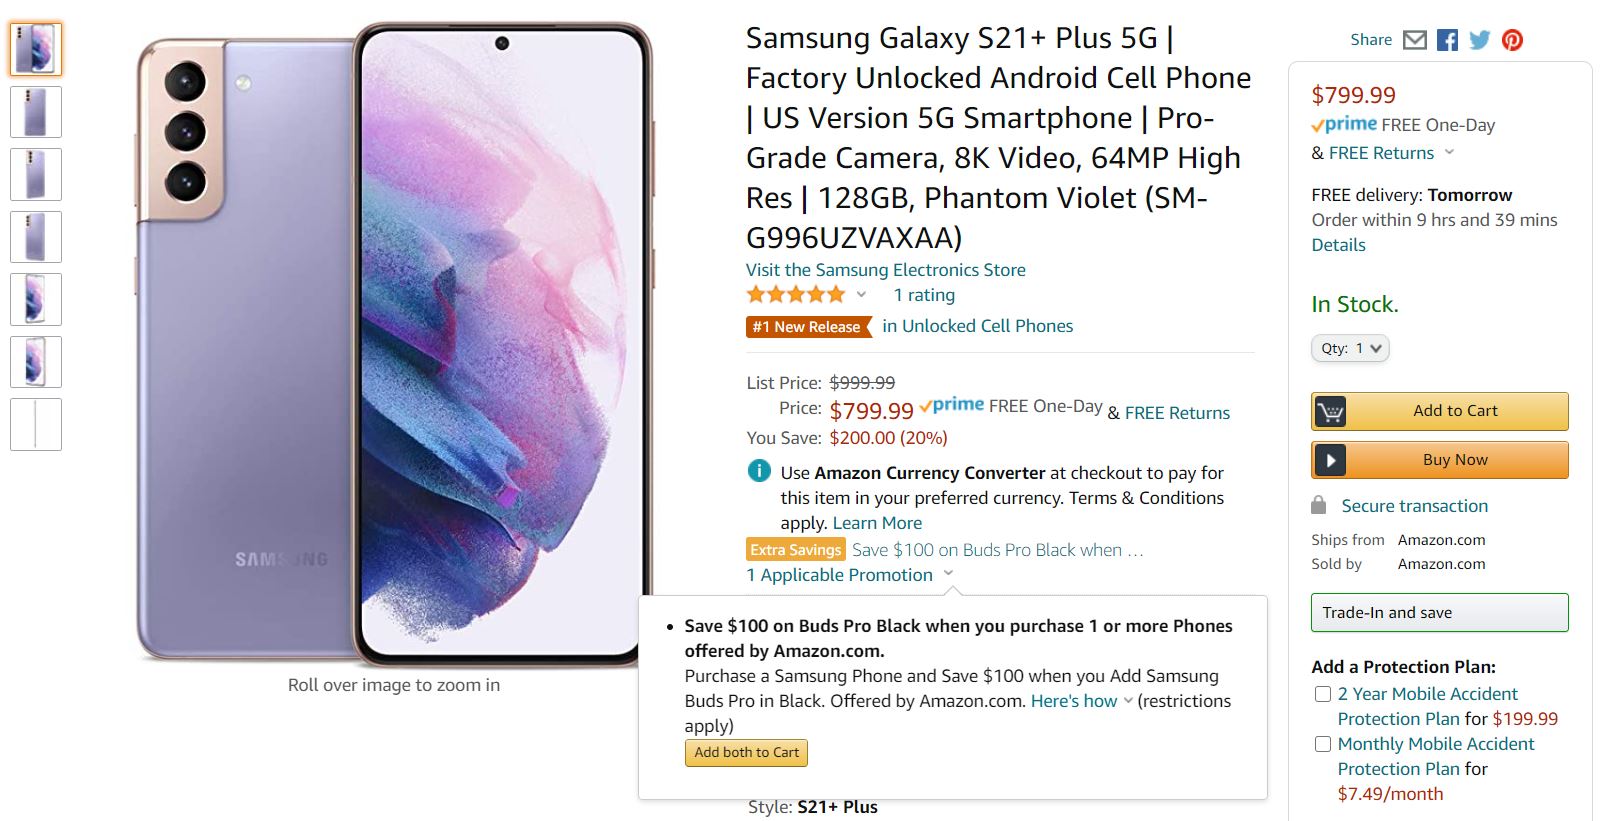 Samsung Galaxy S21 Plus and Galaxy Buds Pro Amazon Deal